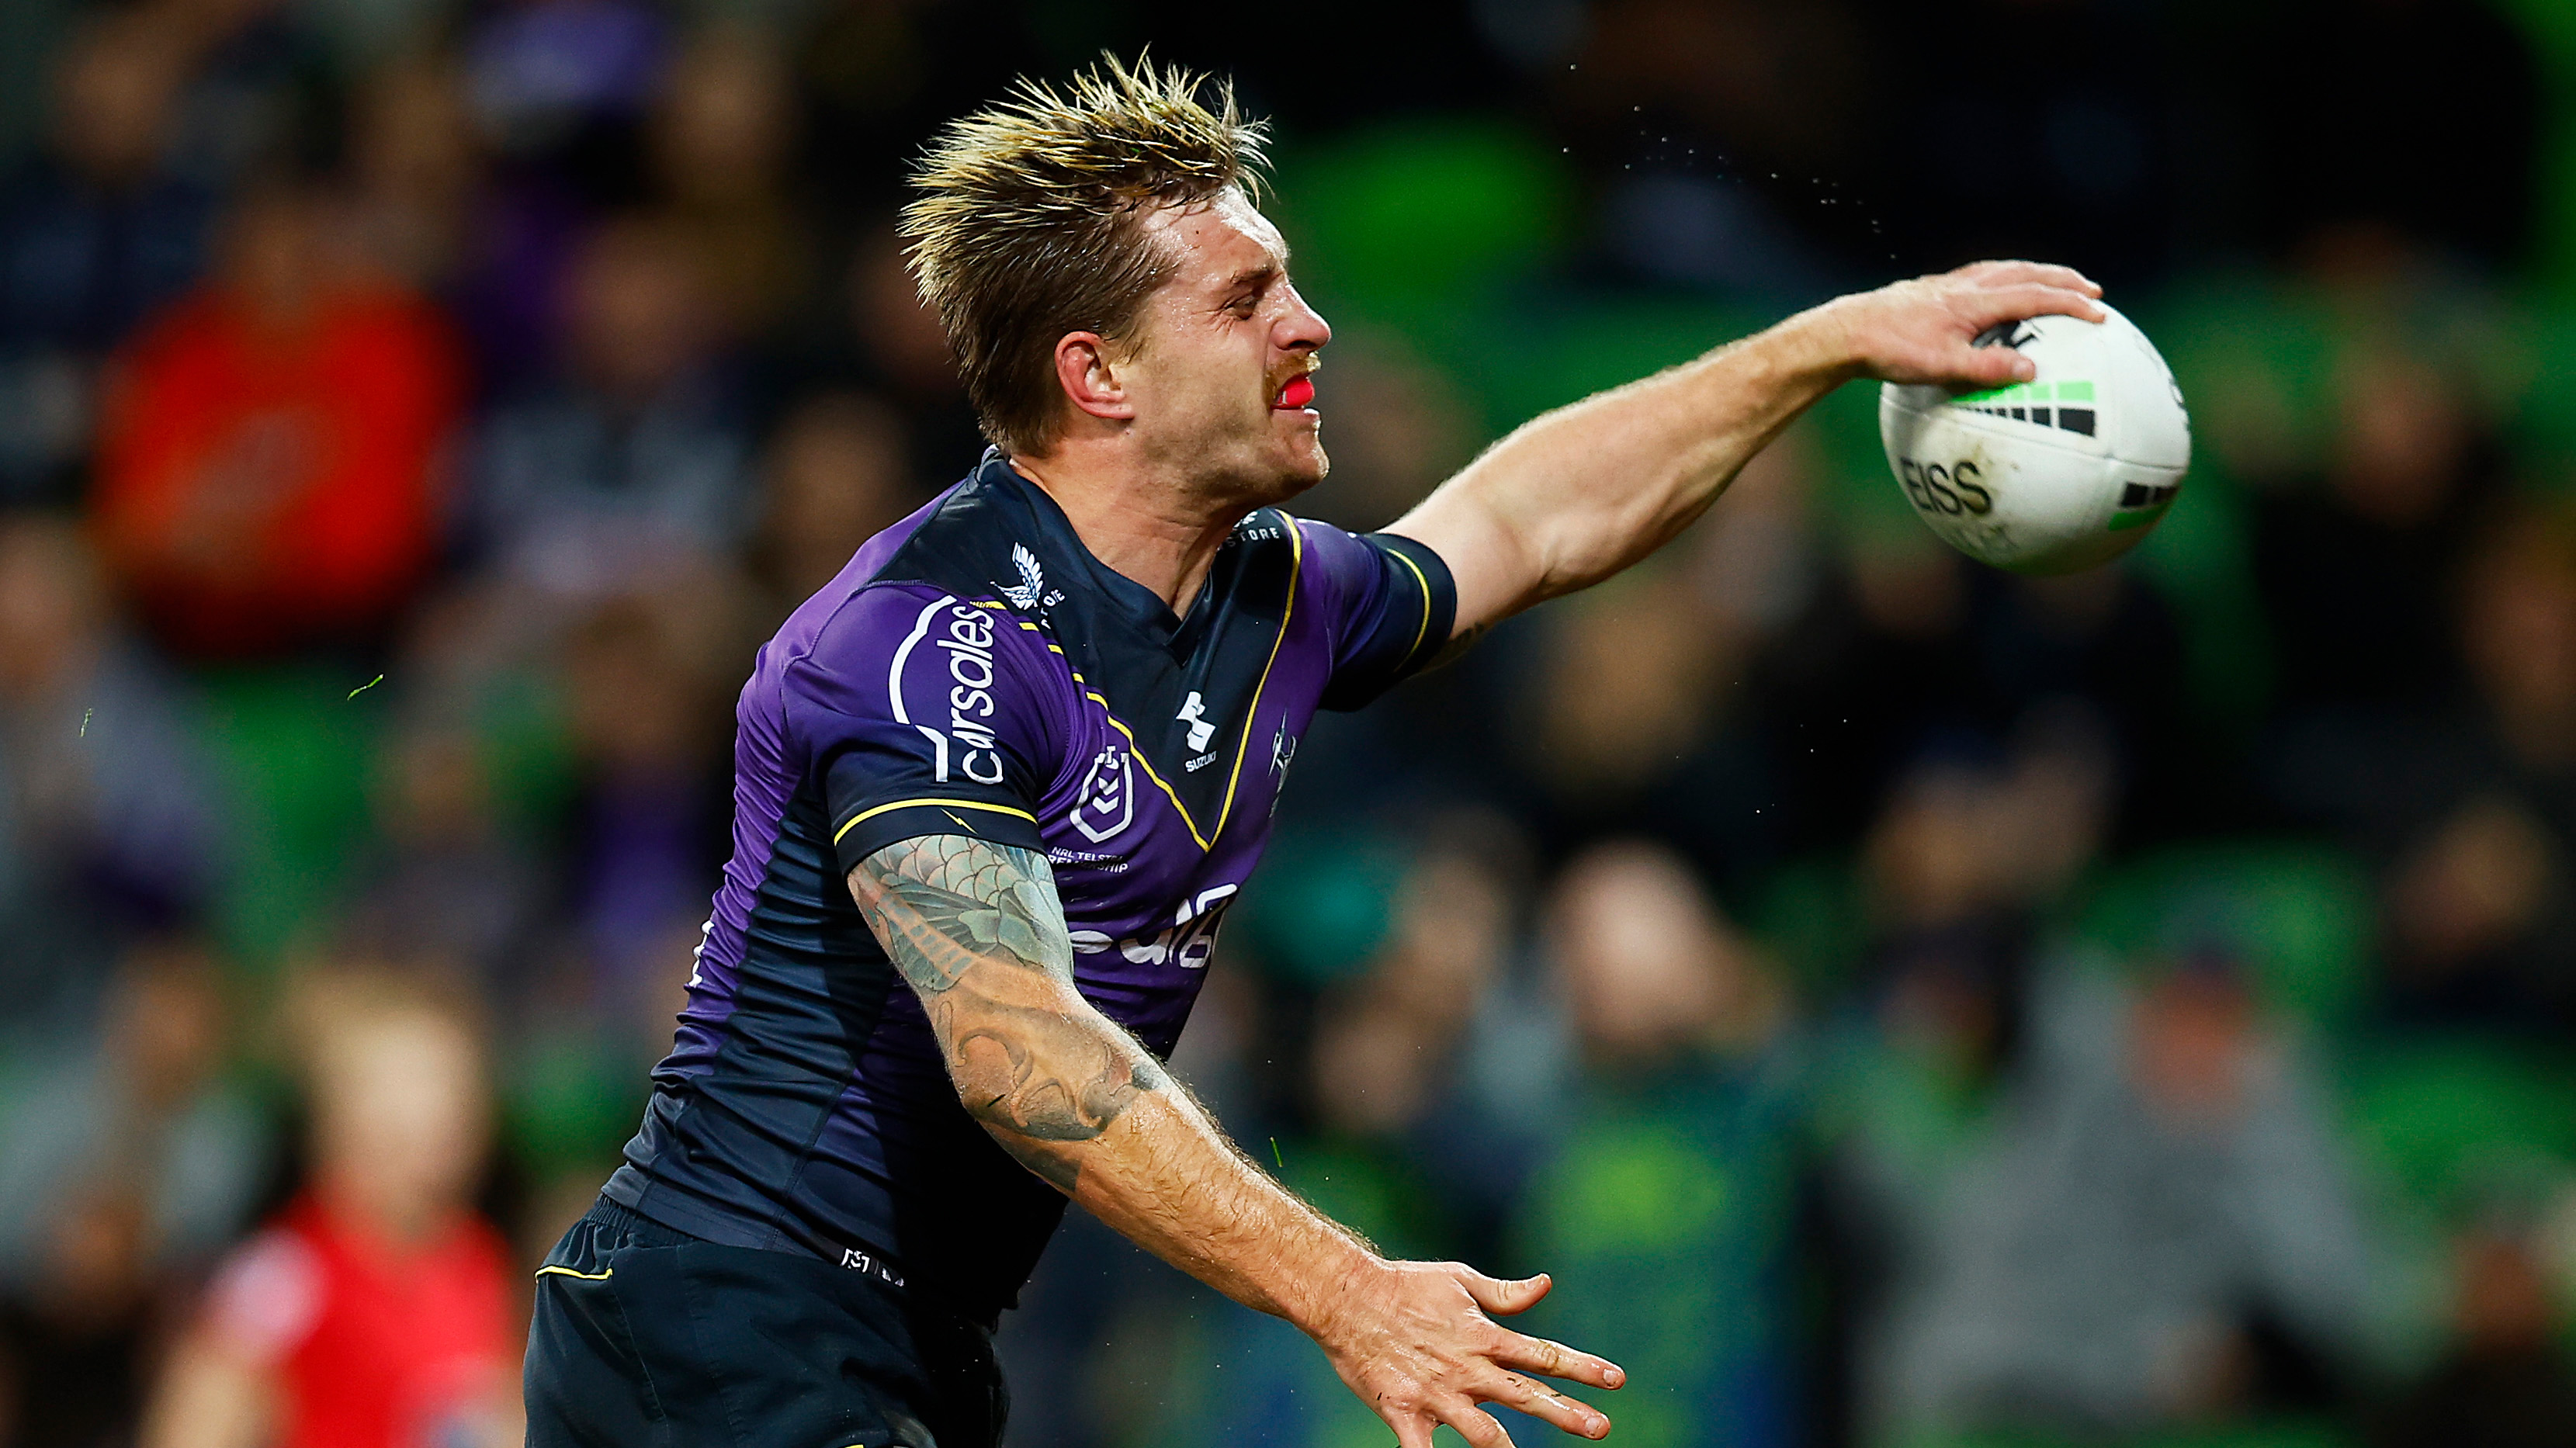 Cameron Munster of the Storm celebrates scoring a try during the round 21 NRL match between the Melbourne Storm and the Gold Coast Titans at AAMI Park, on August 05, 2022, in Melbourne, Australia. (Photo by Daniel Pockett/Getty Images)